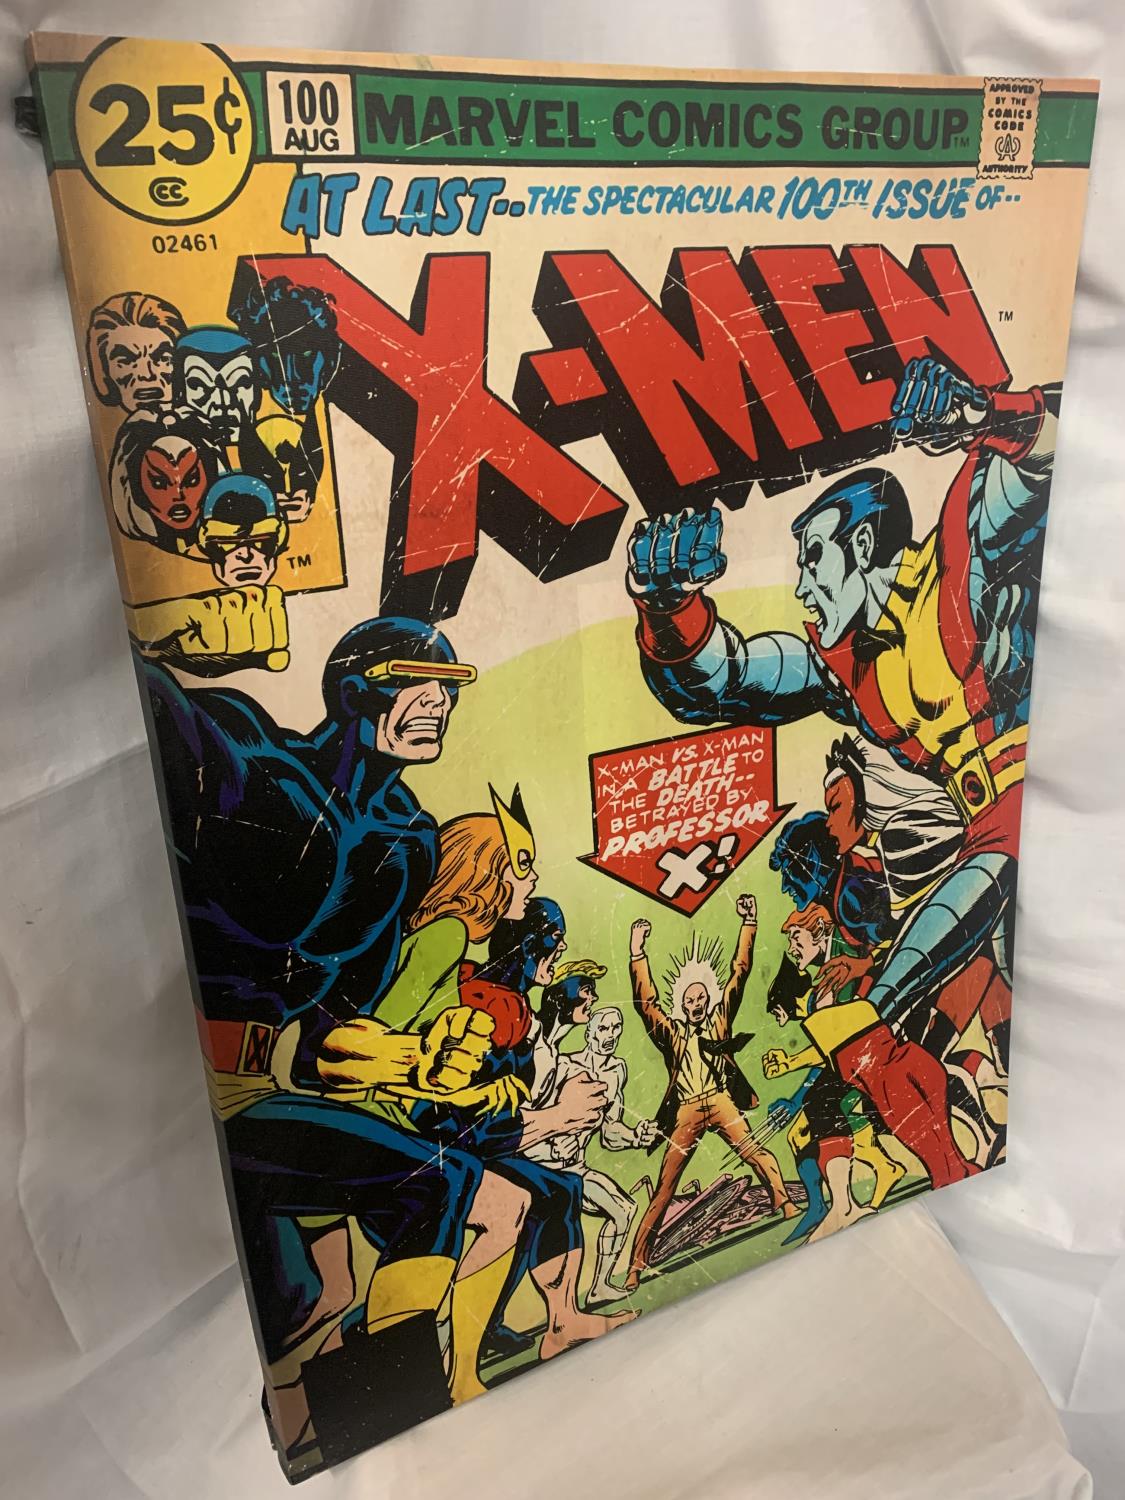 A LARGE XMEN COMIC STYLE CANVAS - Image 4 of 6